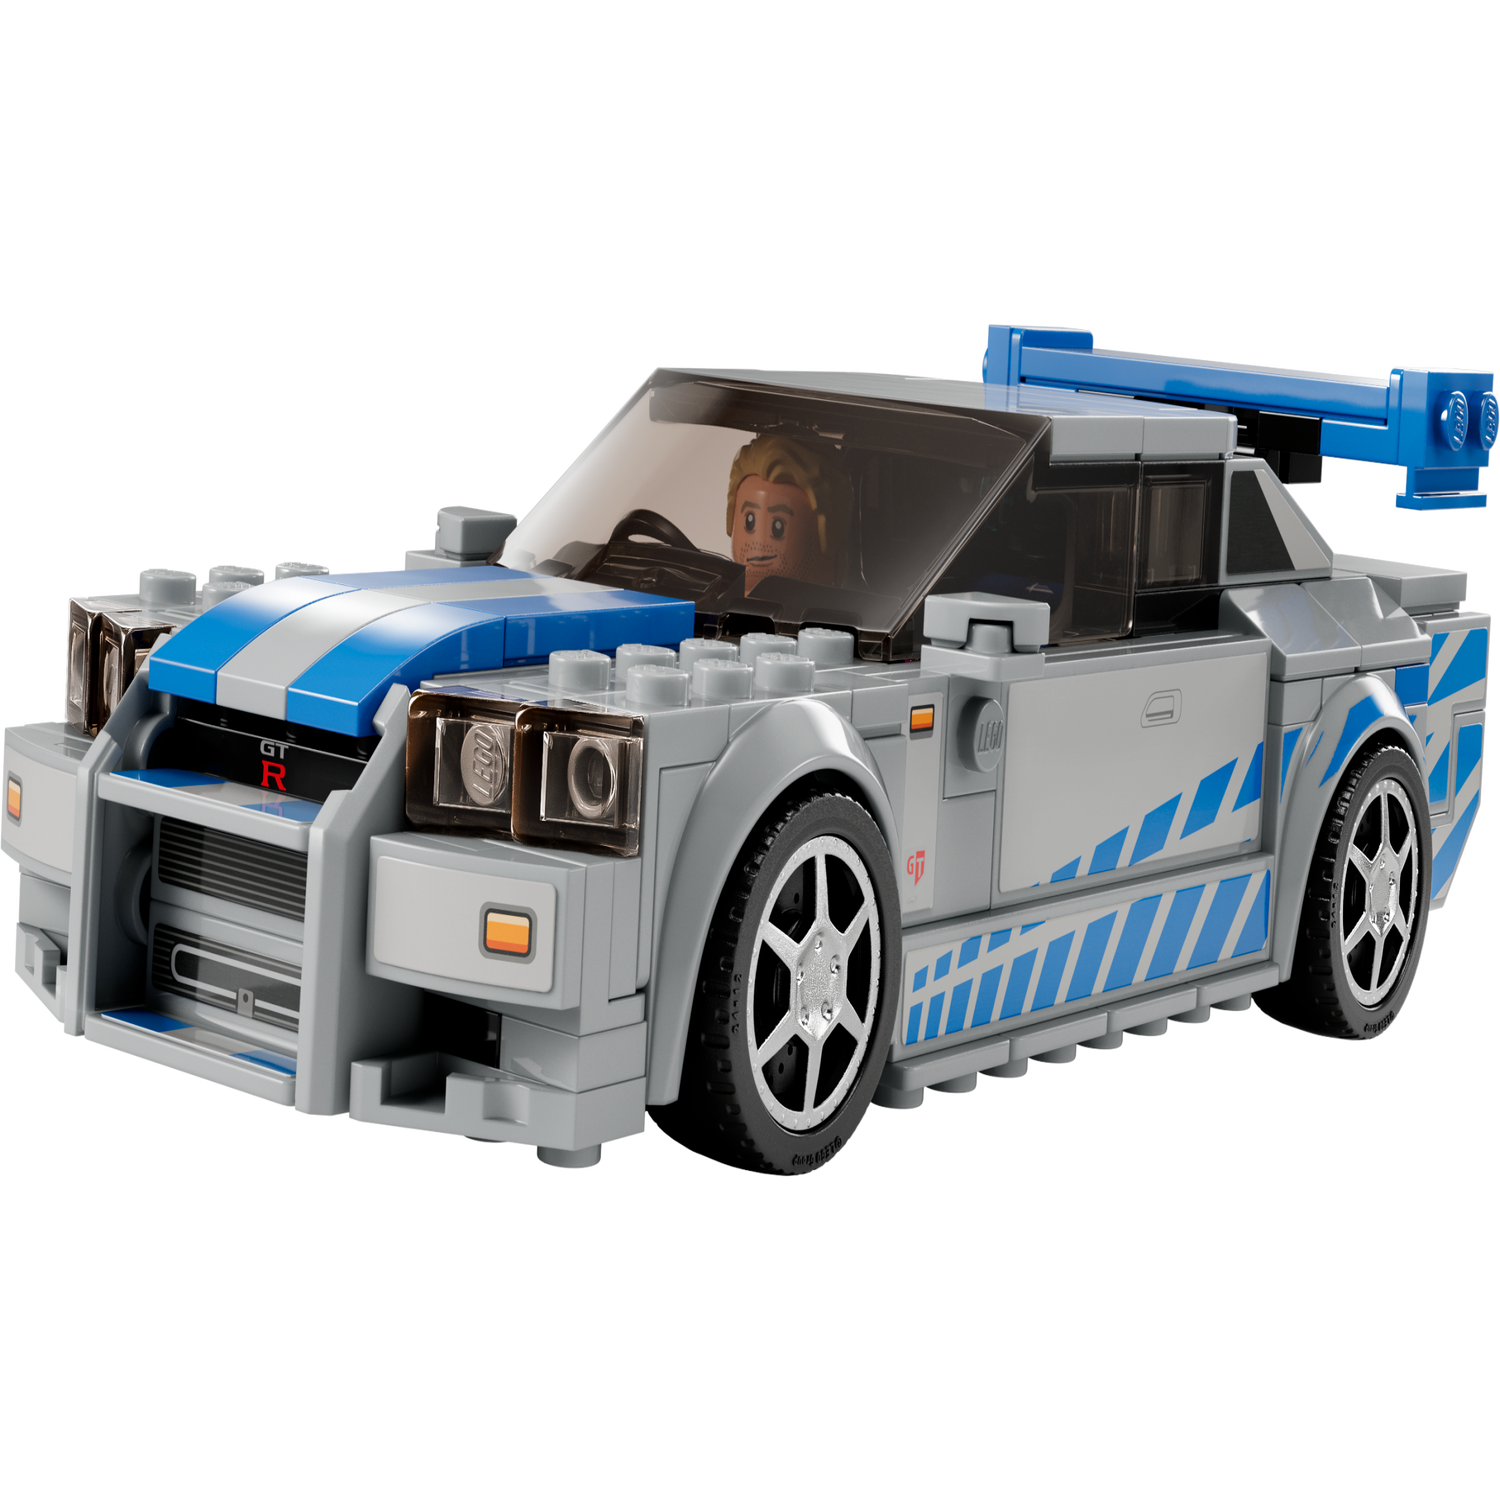 LEGO Speed Champions 76917 pas cher, Nissan Skyline GT-R (R34) 2 Fast 2  Furious